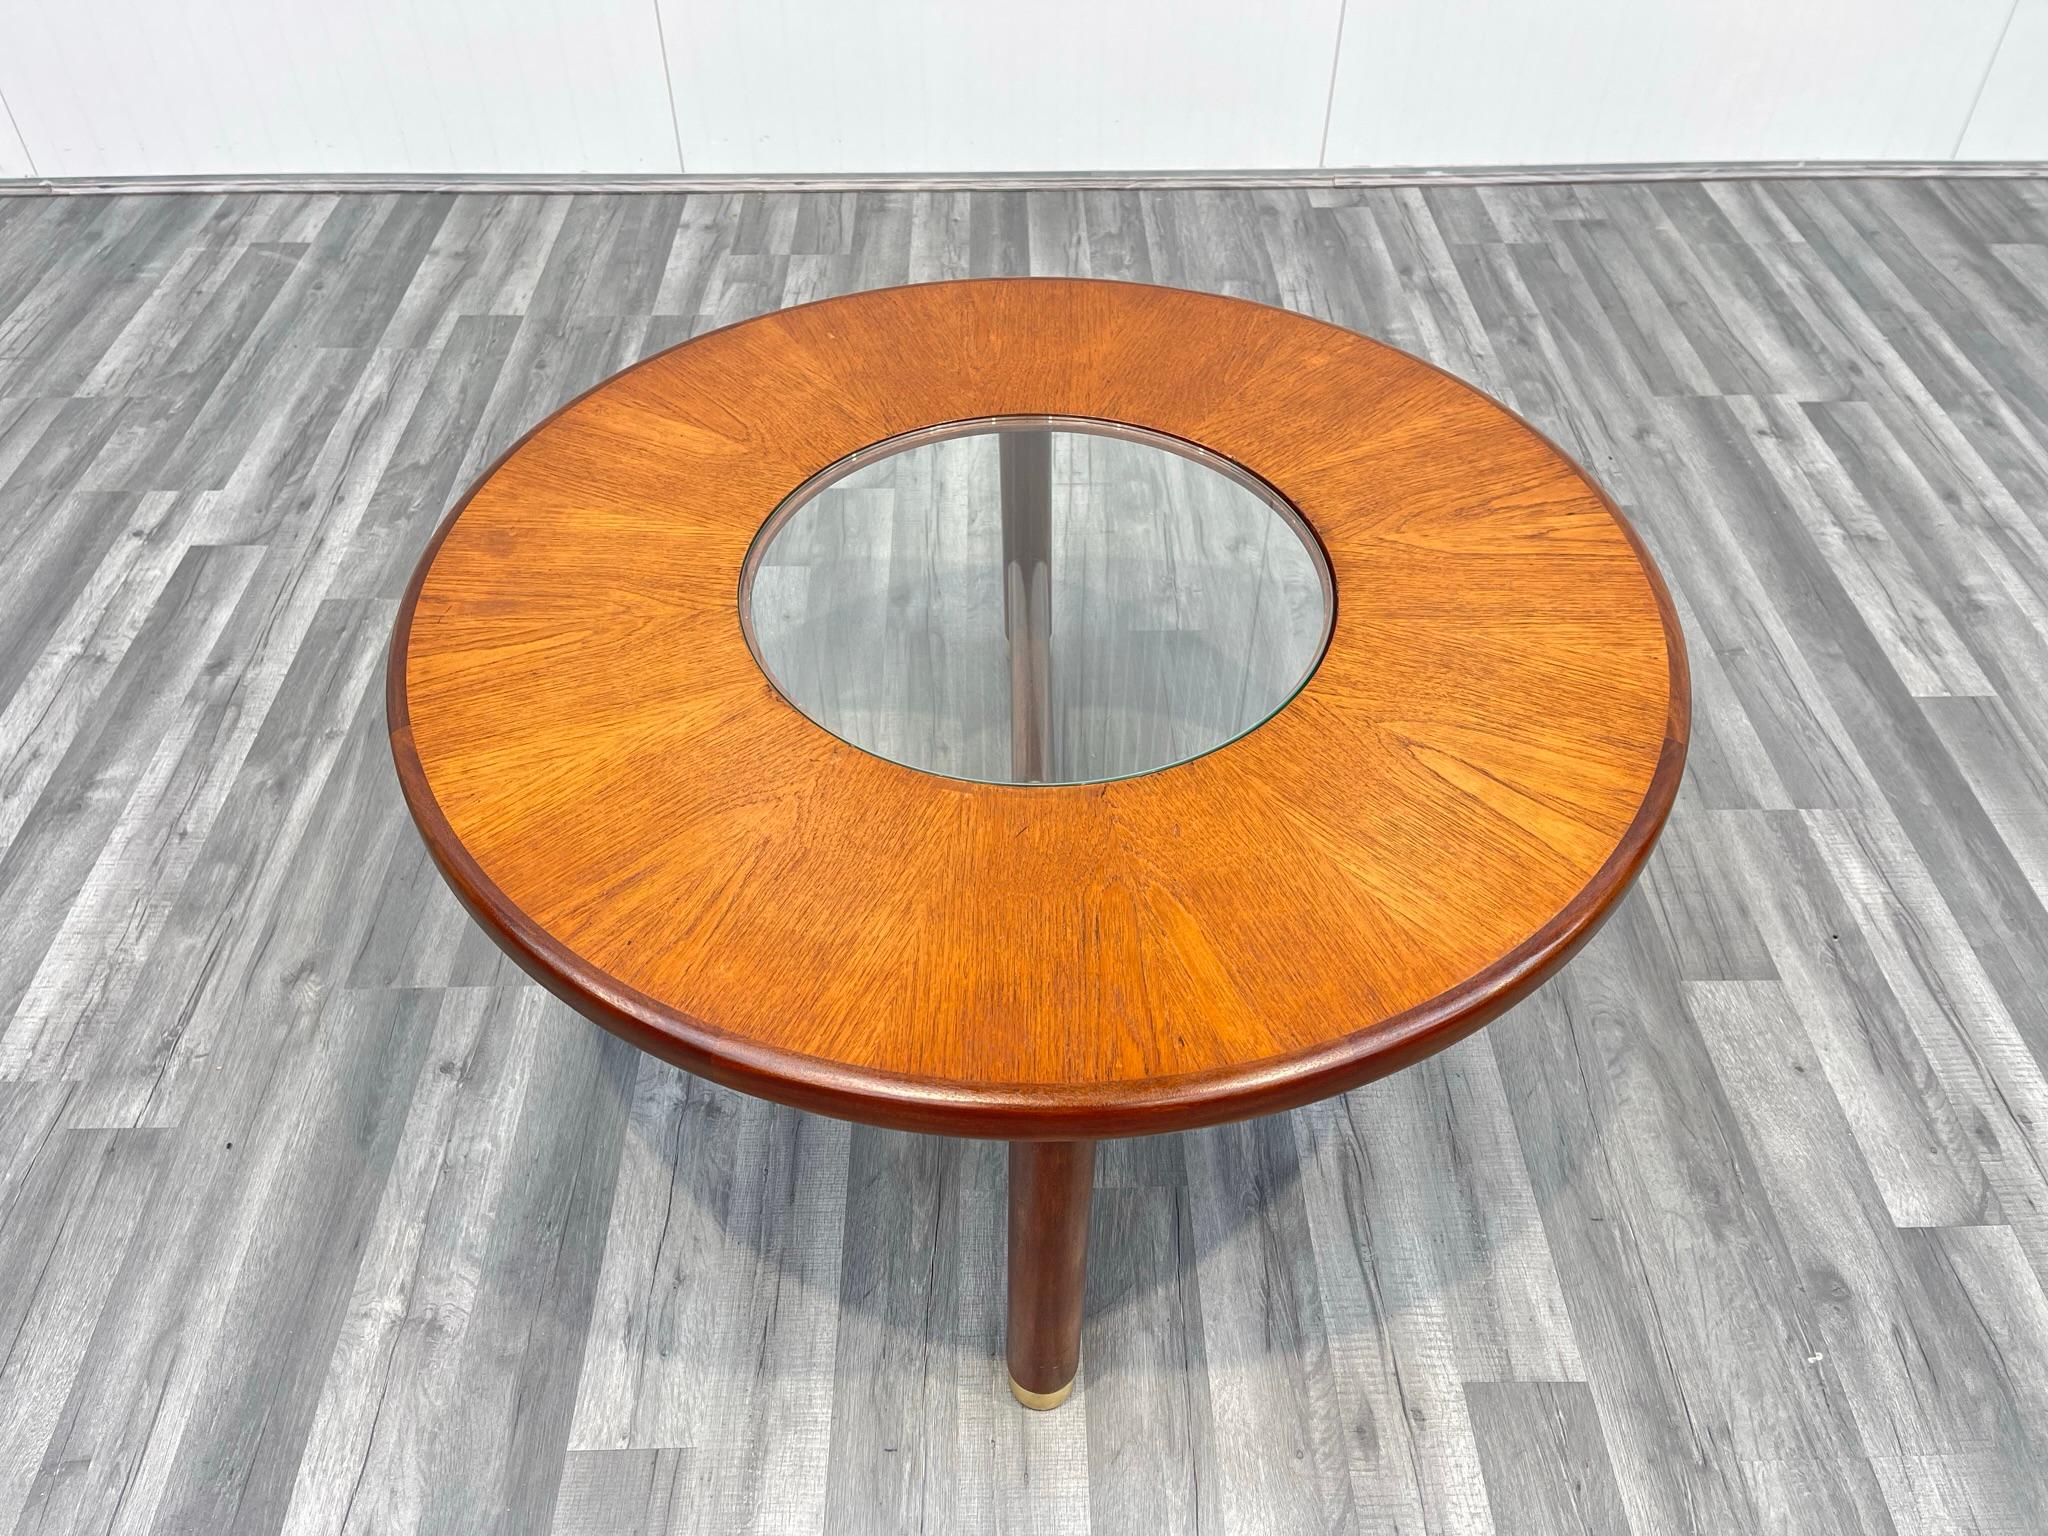 This round stained teak and glass coffee table was manufactured by G-Plan, and was produced in England in the 1970s. A real touch of Boho Chic about this one!

Structurally sound with brand new, unscratched glass in the centre of the